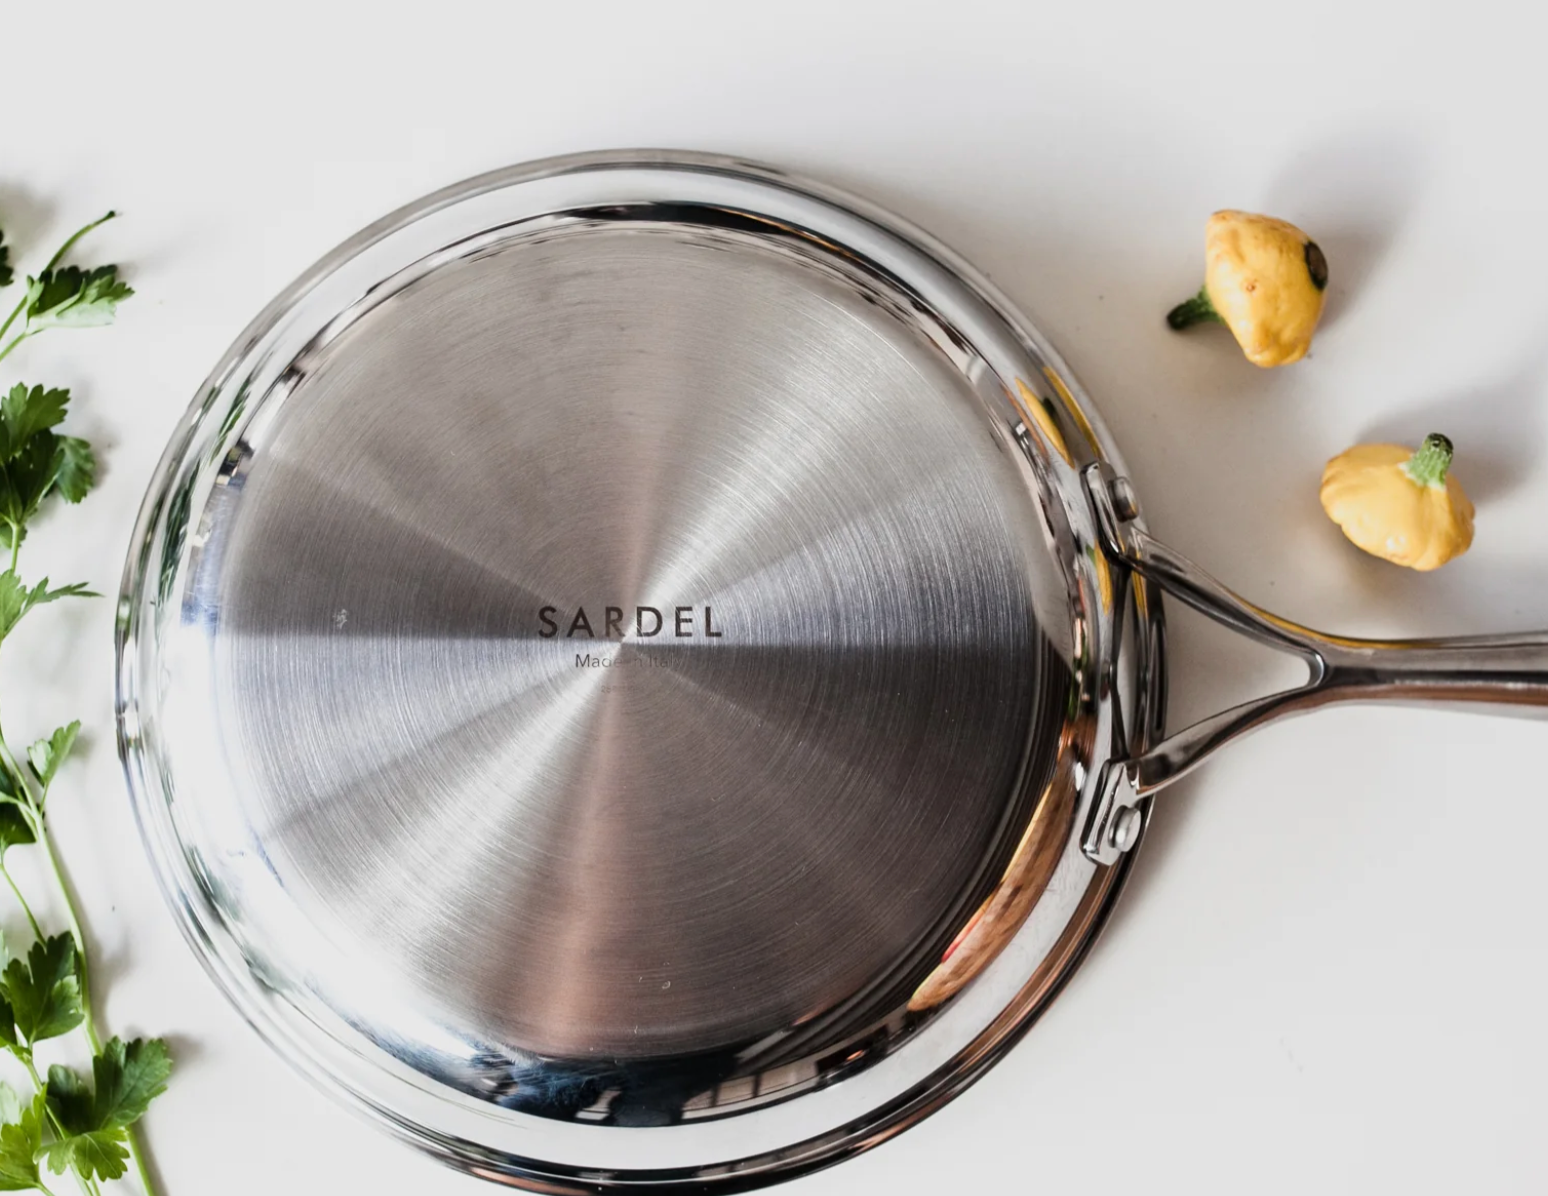 Sardel Stainless Steel Skillet Made in Italy review and promo code